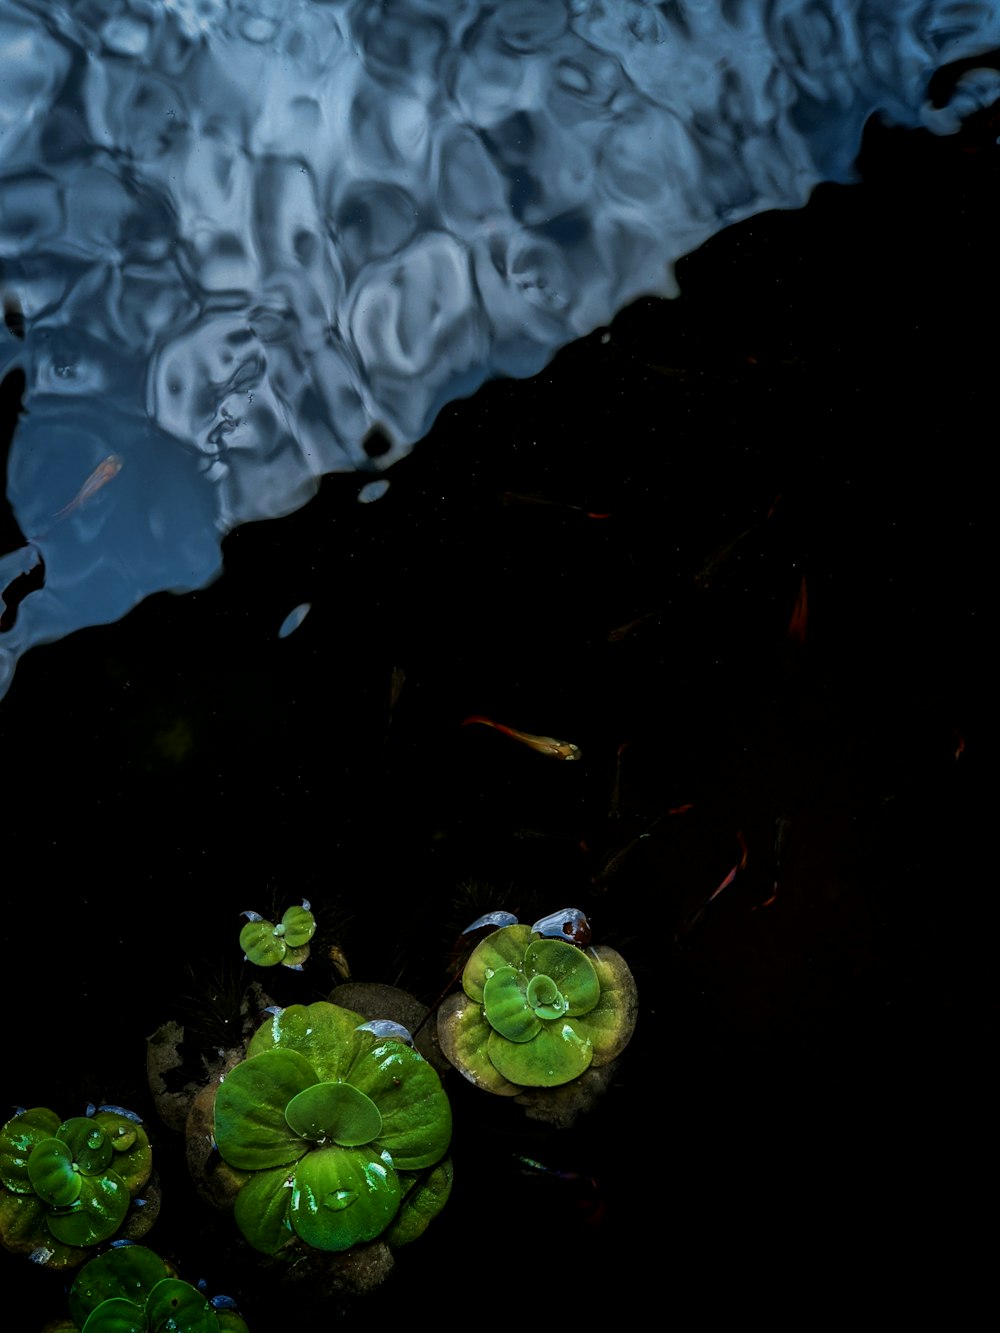 a group of water lilies floating on top of a body of water